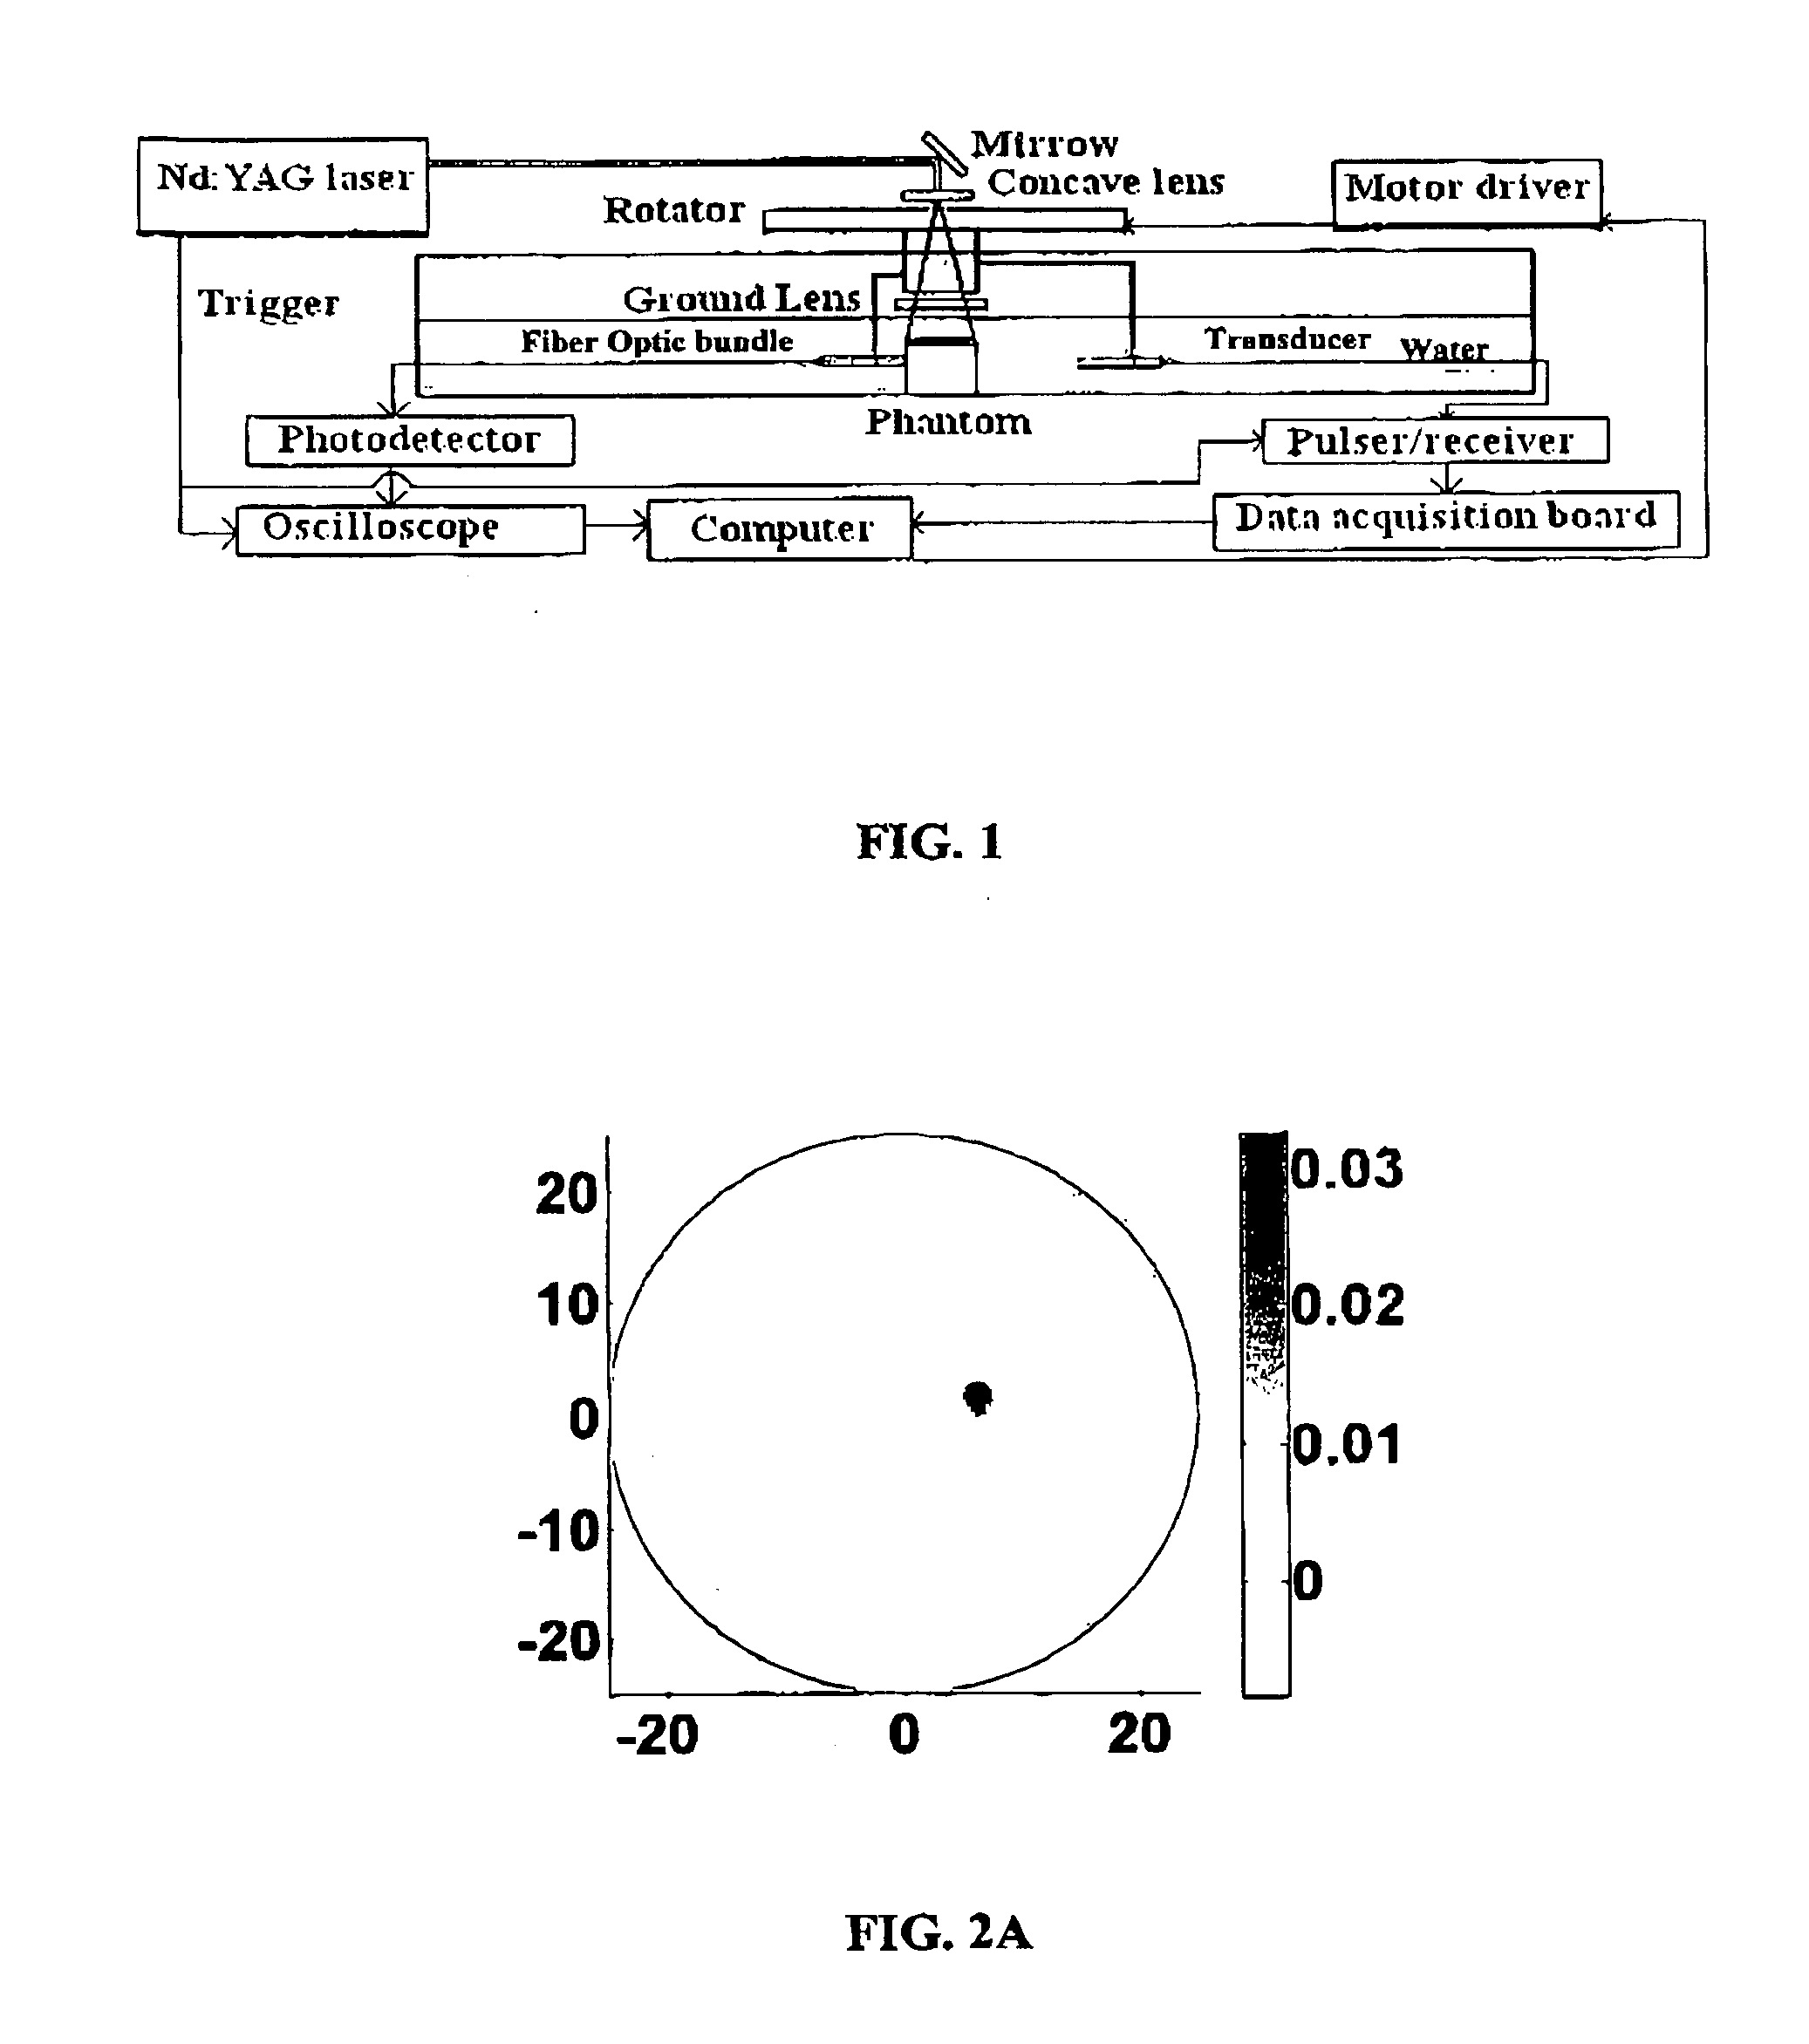 Method and Apparatus for Tomographic Imaging of Absolute Optical Absorption Coefficient in Turbid Media Using Combined Photoacoustic and Diffusing Light Measurements